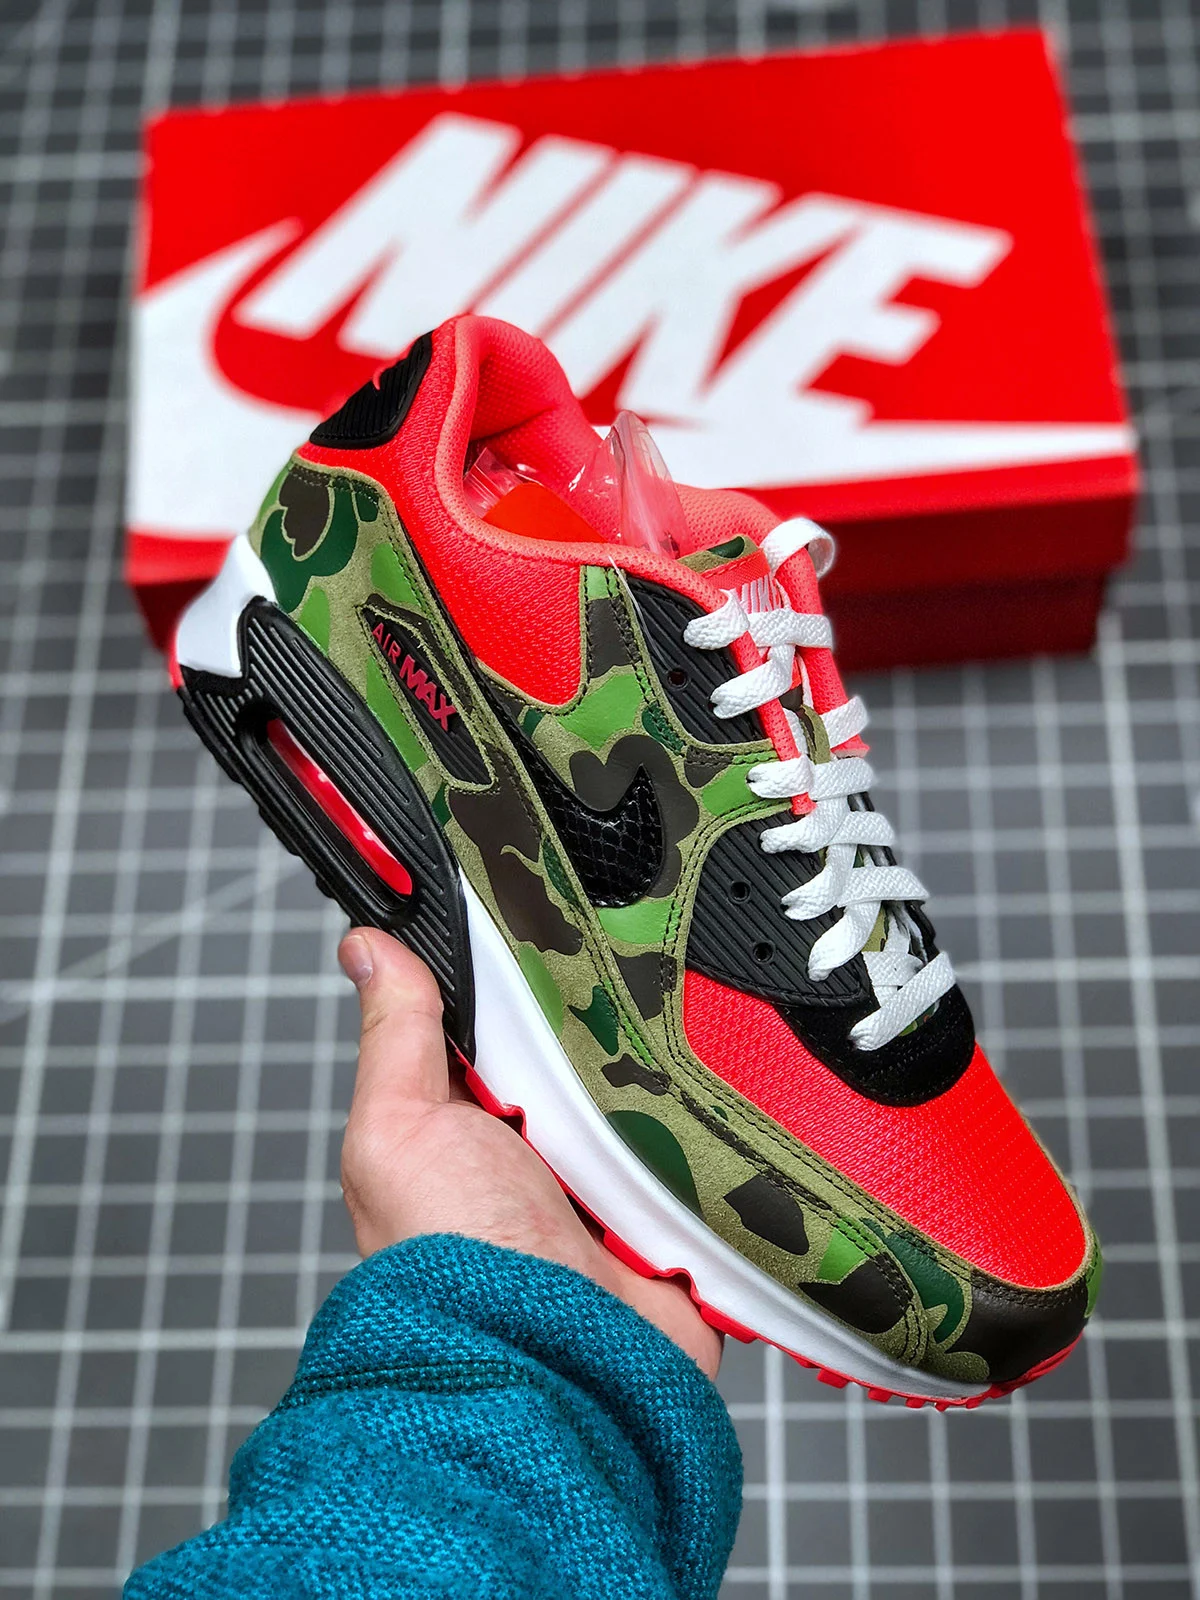 Nike Air Max 90 Reverse Duck Camo Infrared Black CW6024-600 For Sale